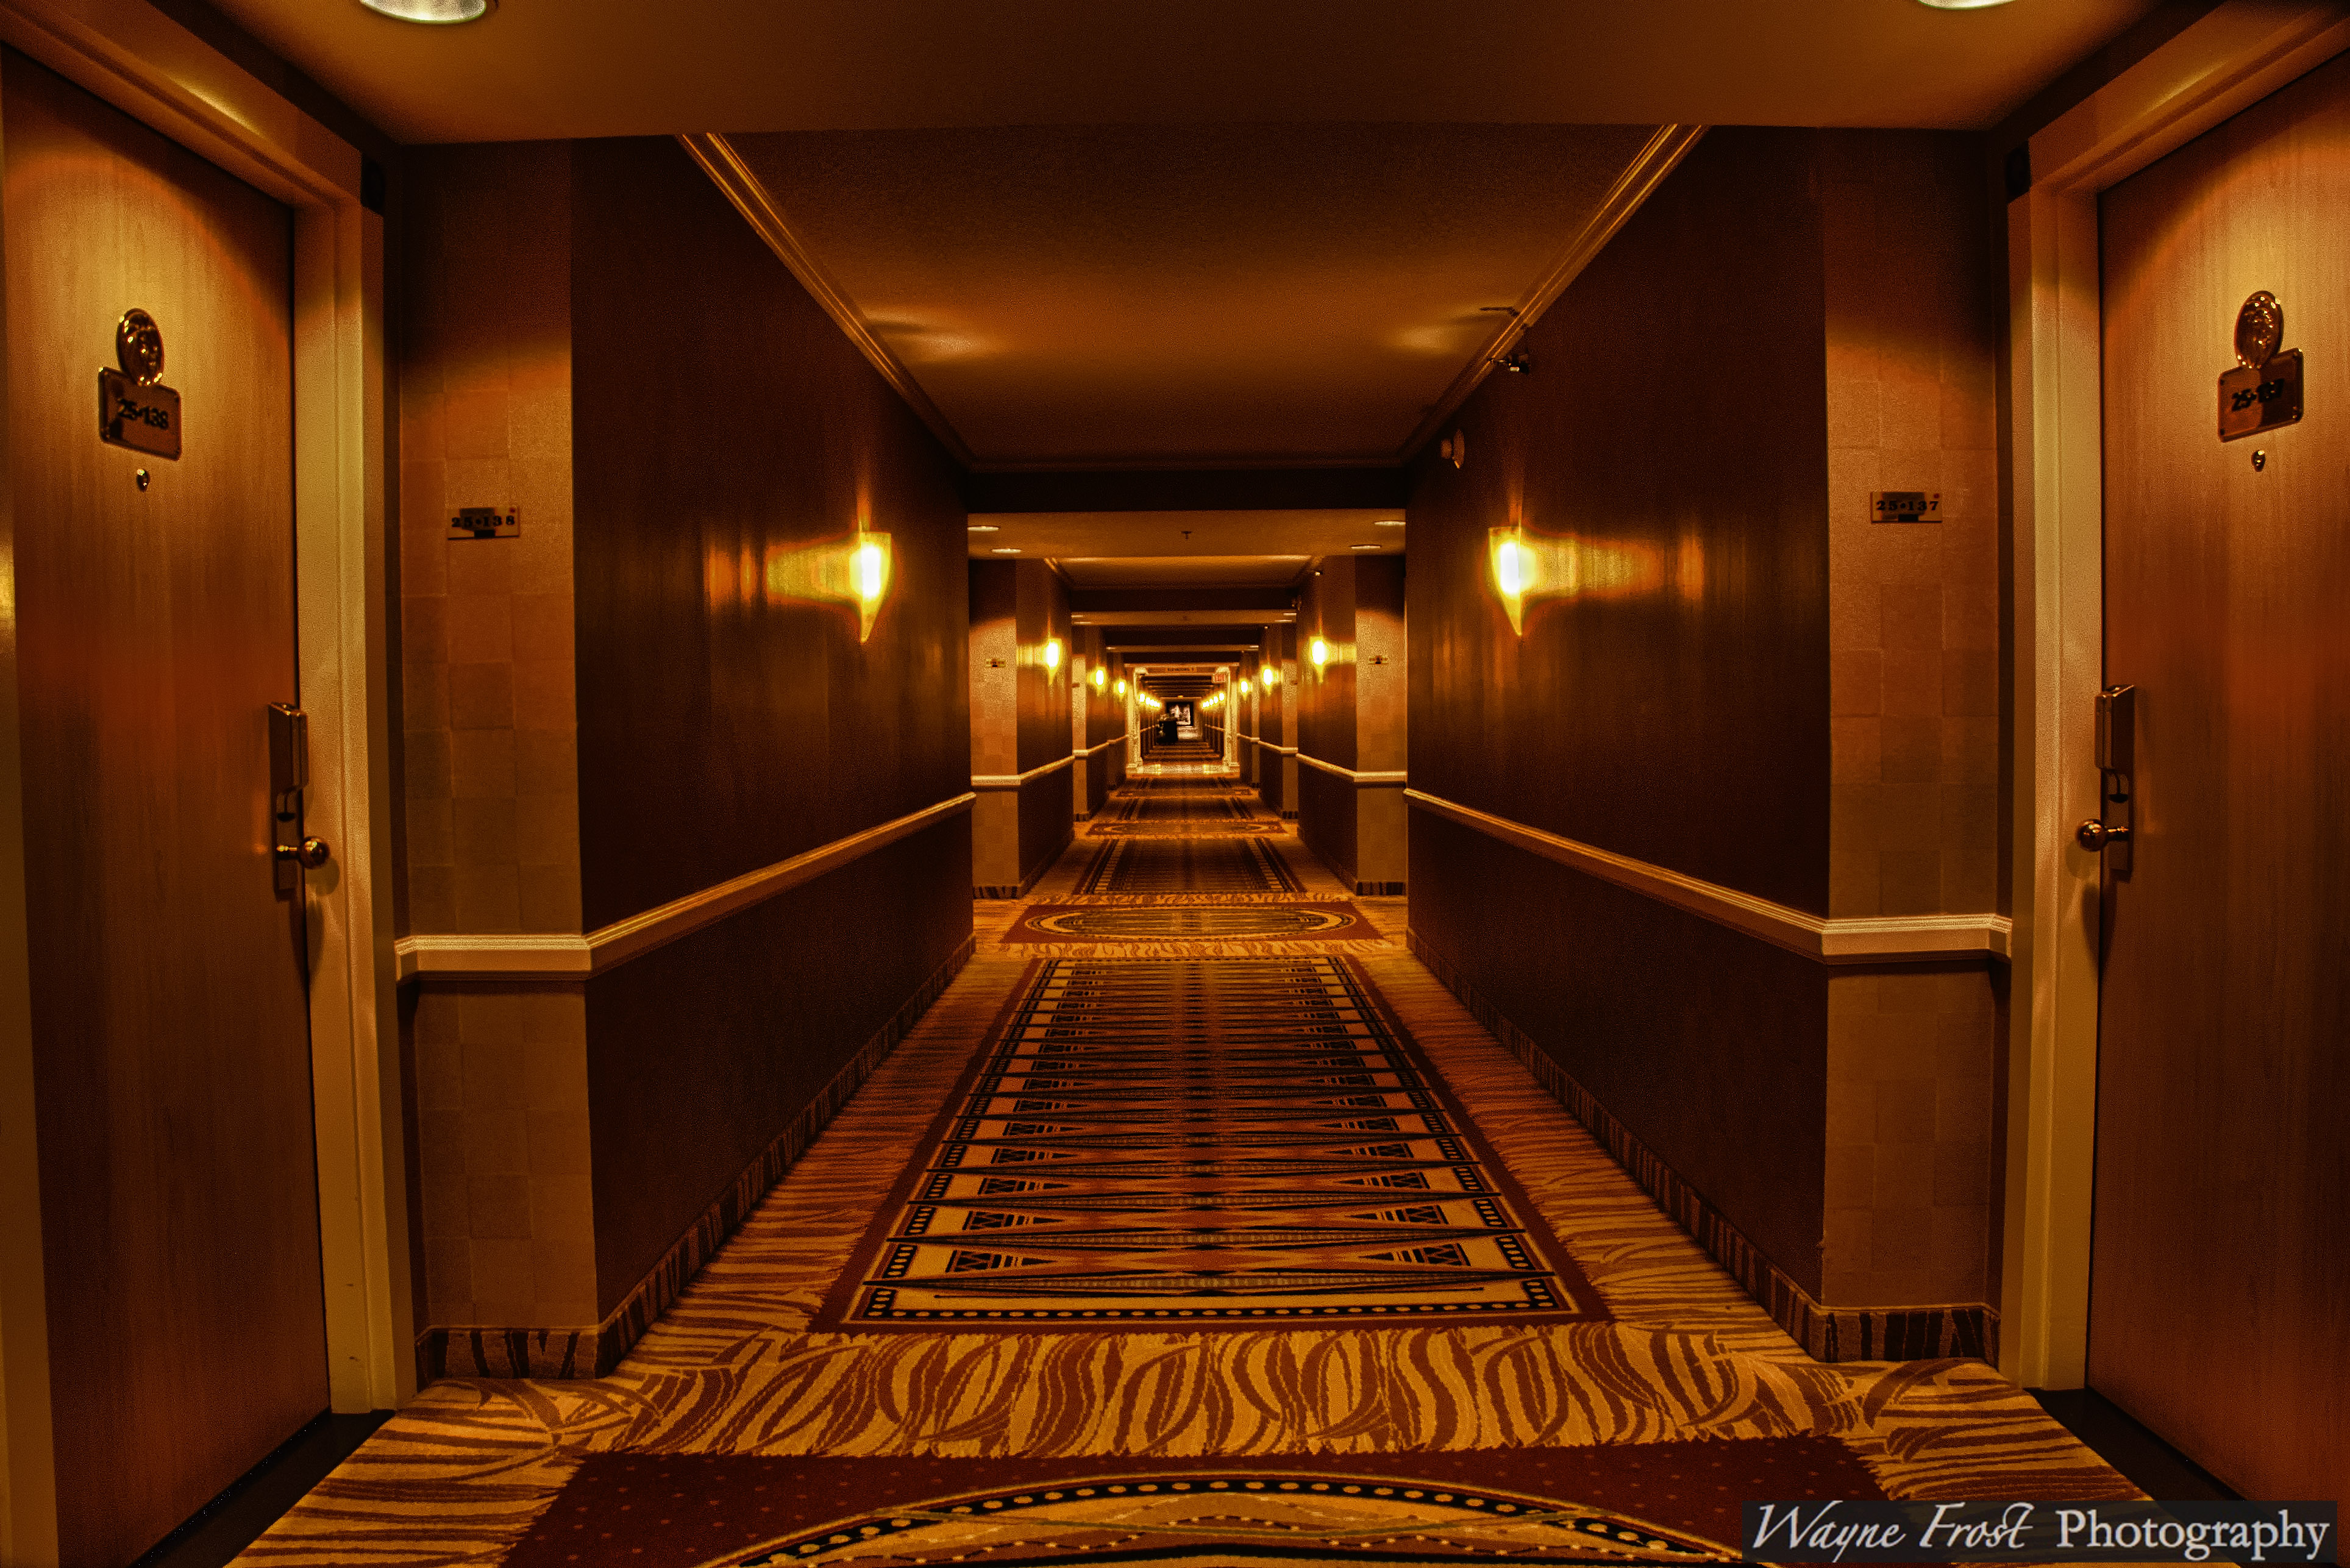  ' hallway to infinity ' taken by wayne e frost on the 20th of december 2010 